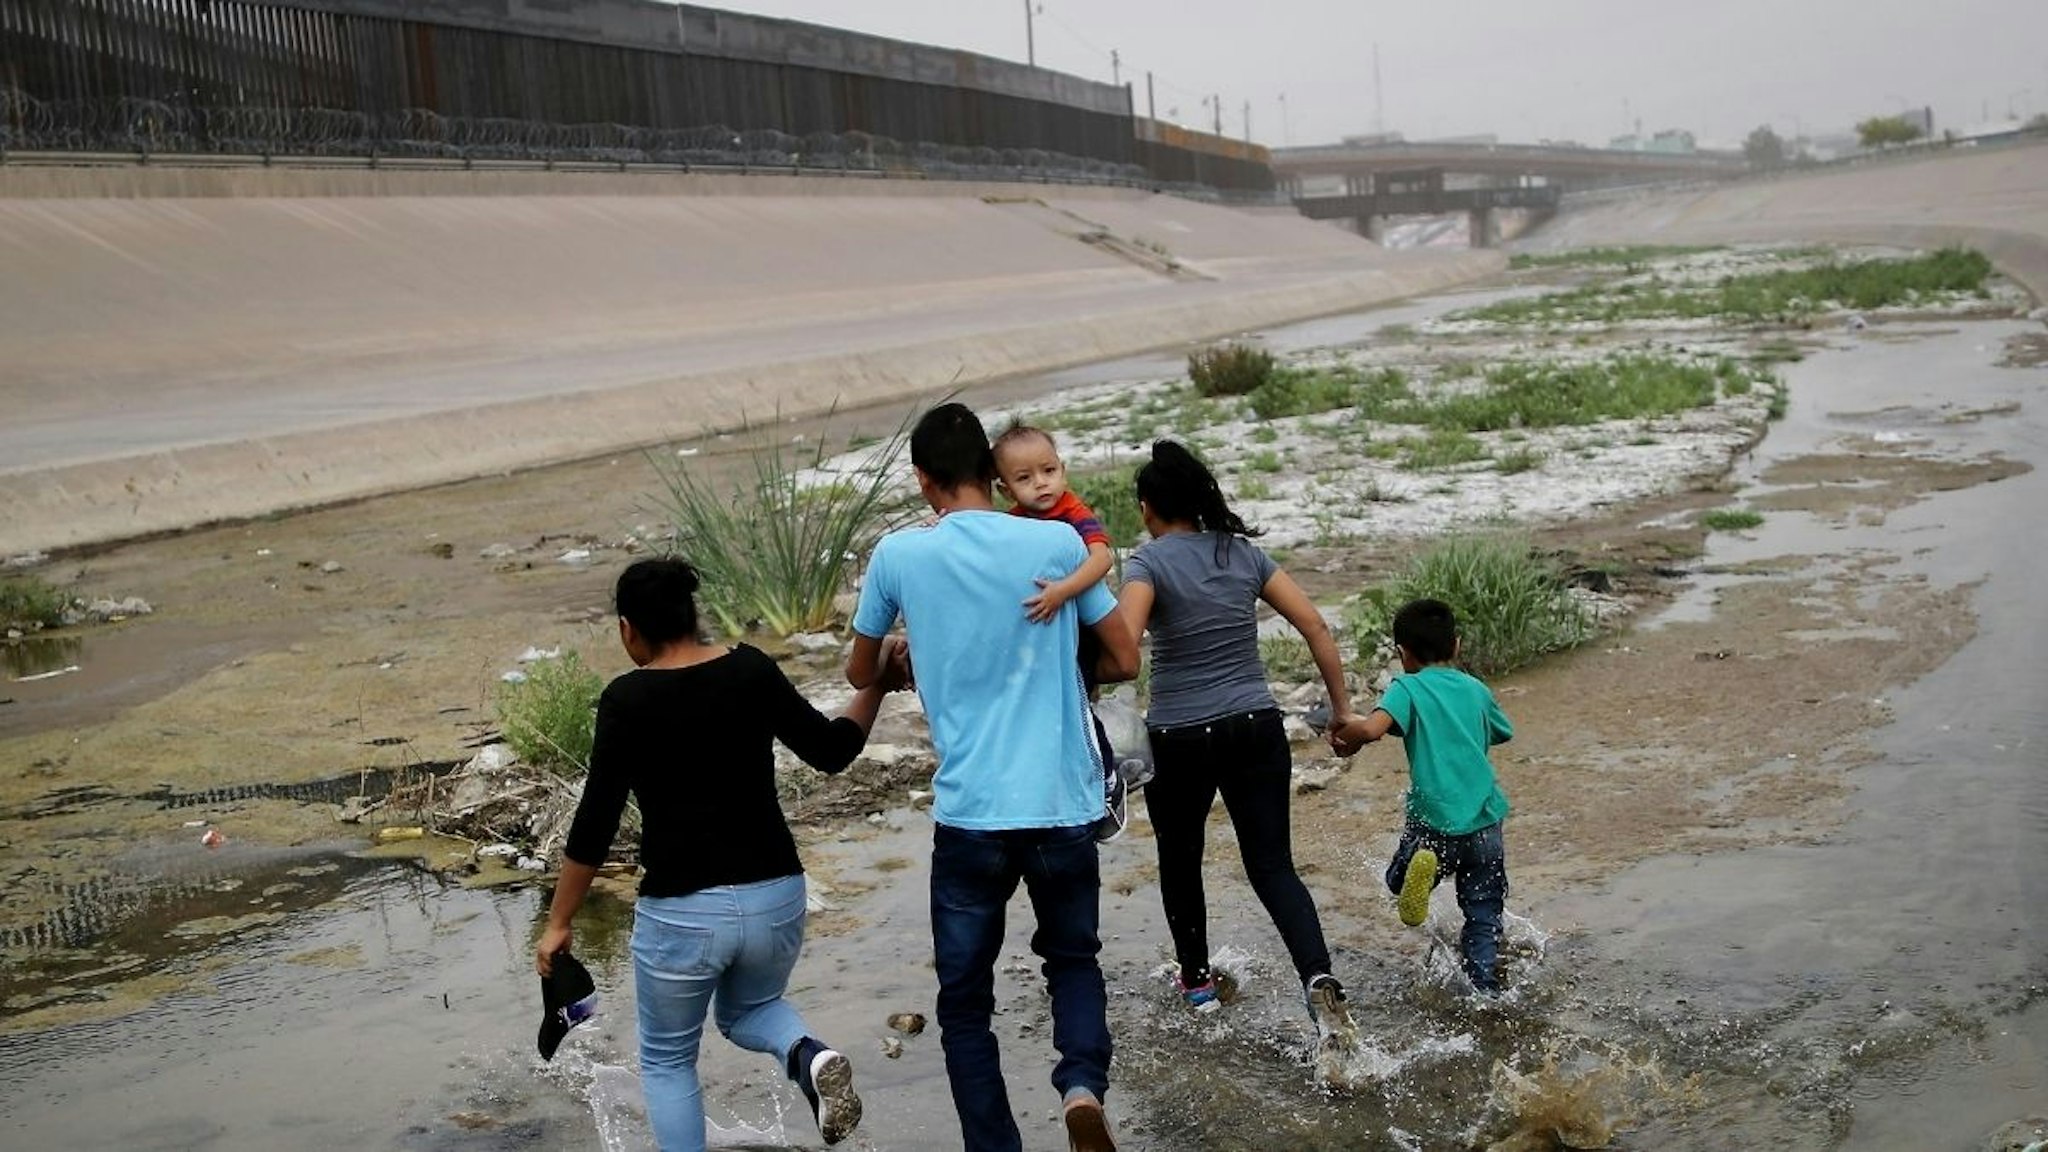 Migrants hold hands as they cross the border between the U.S. and Mexico at the Rio Grande river, on their way to enter El Paso, Texas, on May 20, 2019 as taken from Ciudad Juarez, Mexico.